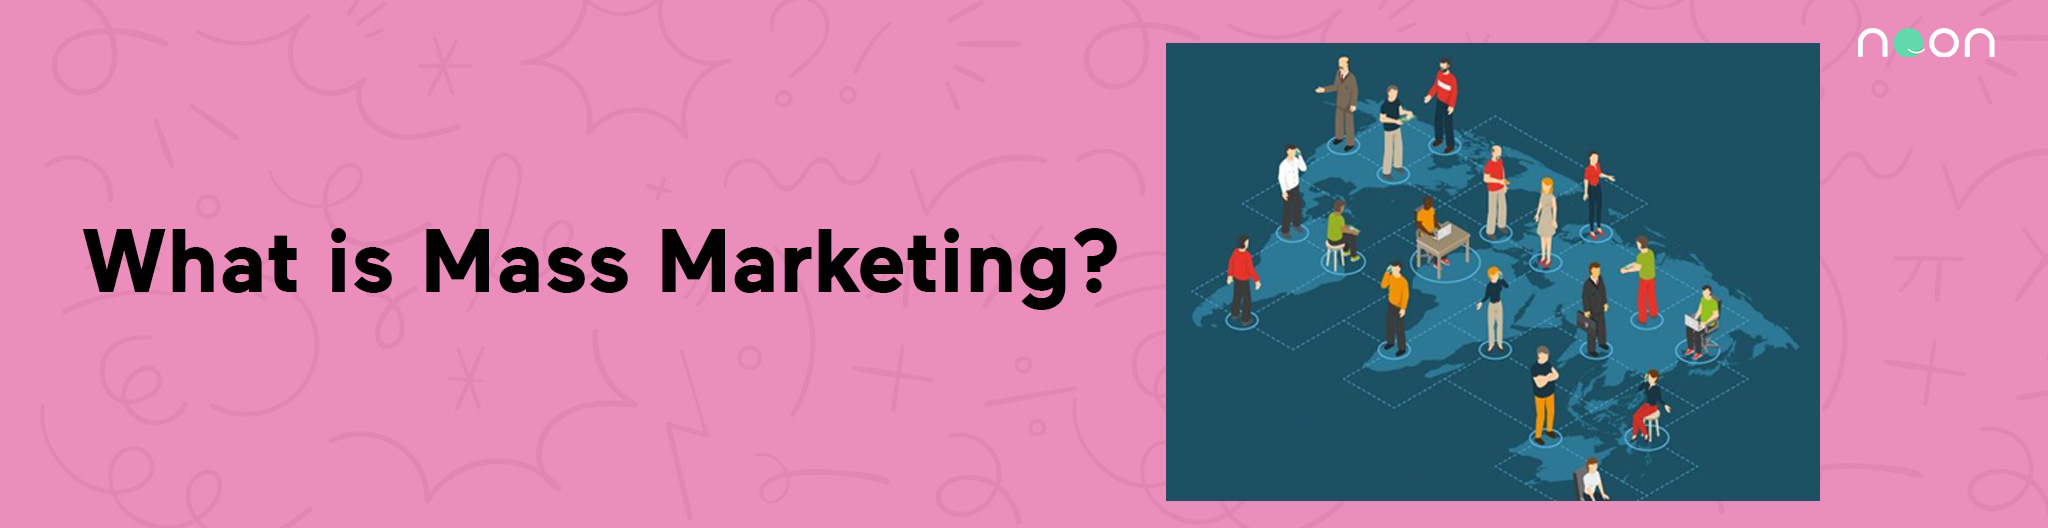 What is Mass Marketing